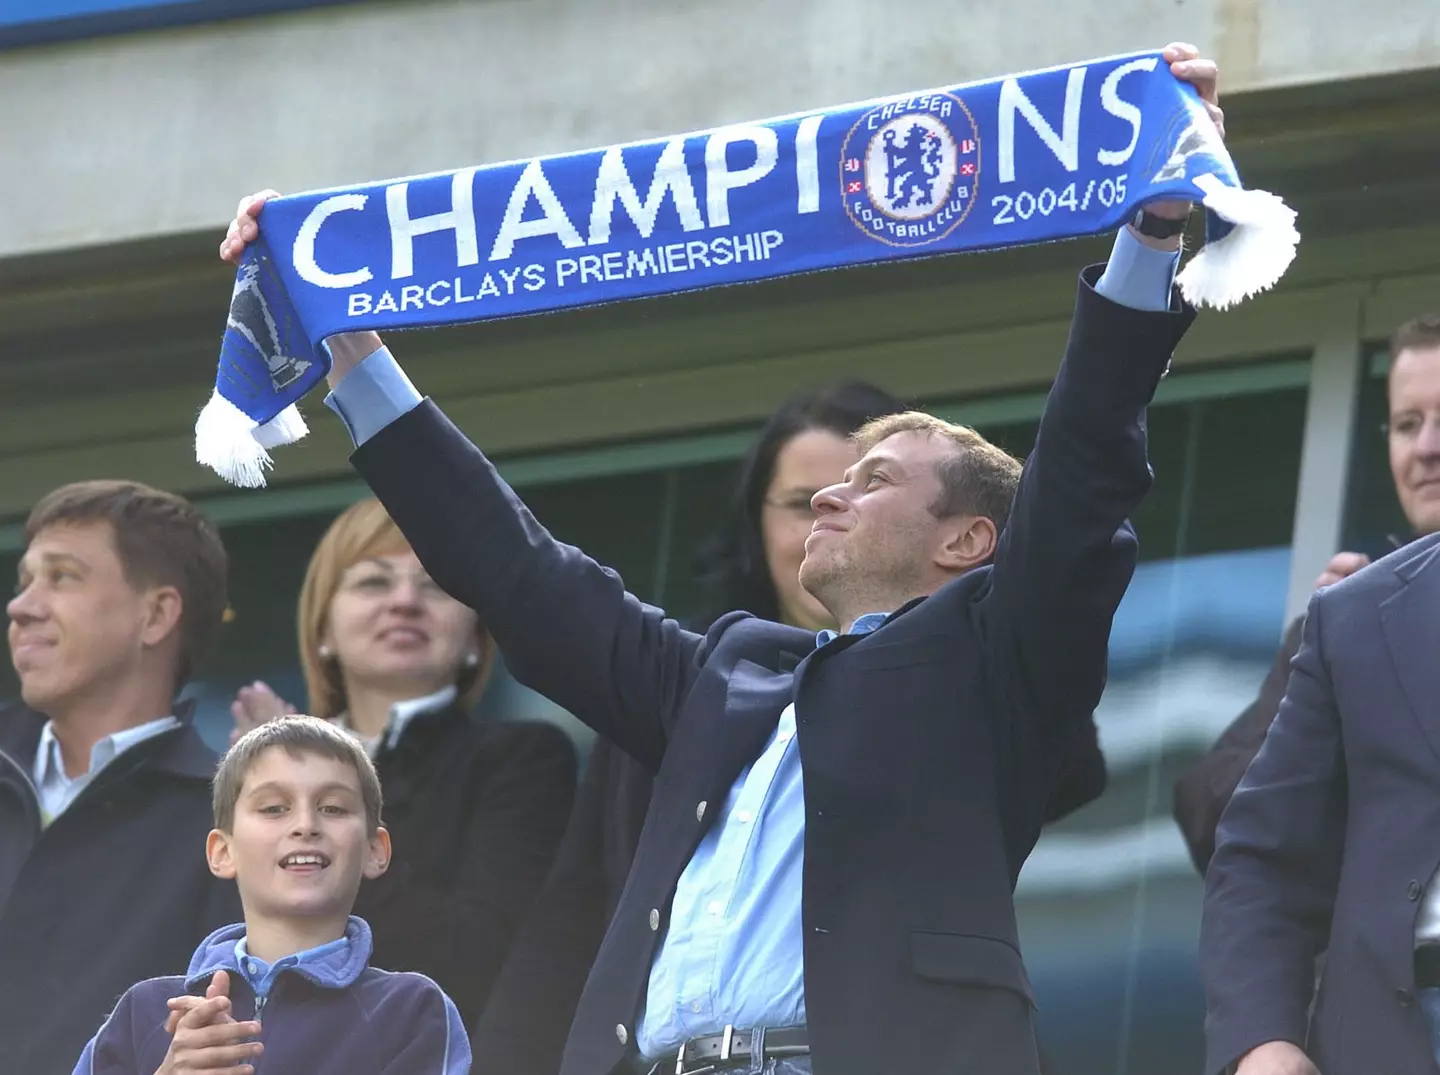 Abramovich is looking to sell after years of success. Image: PA Images